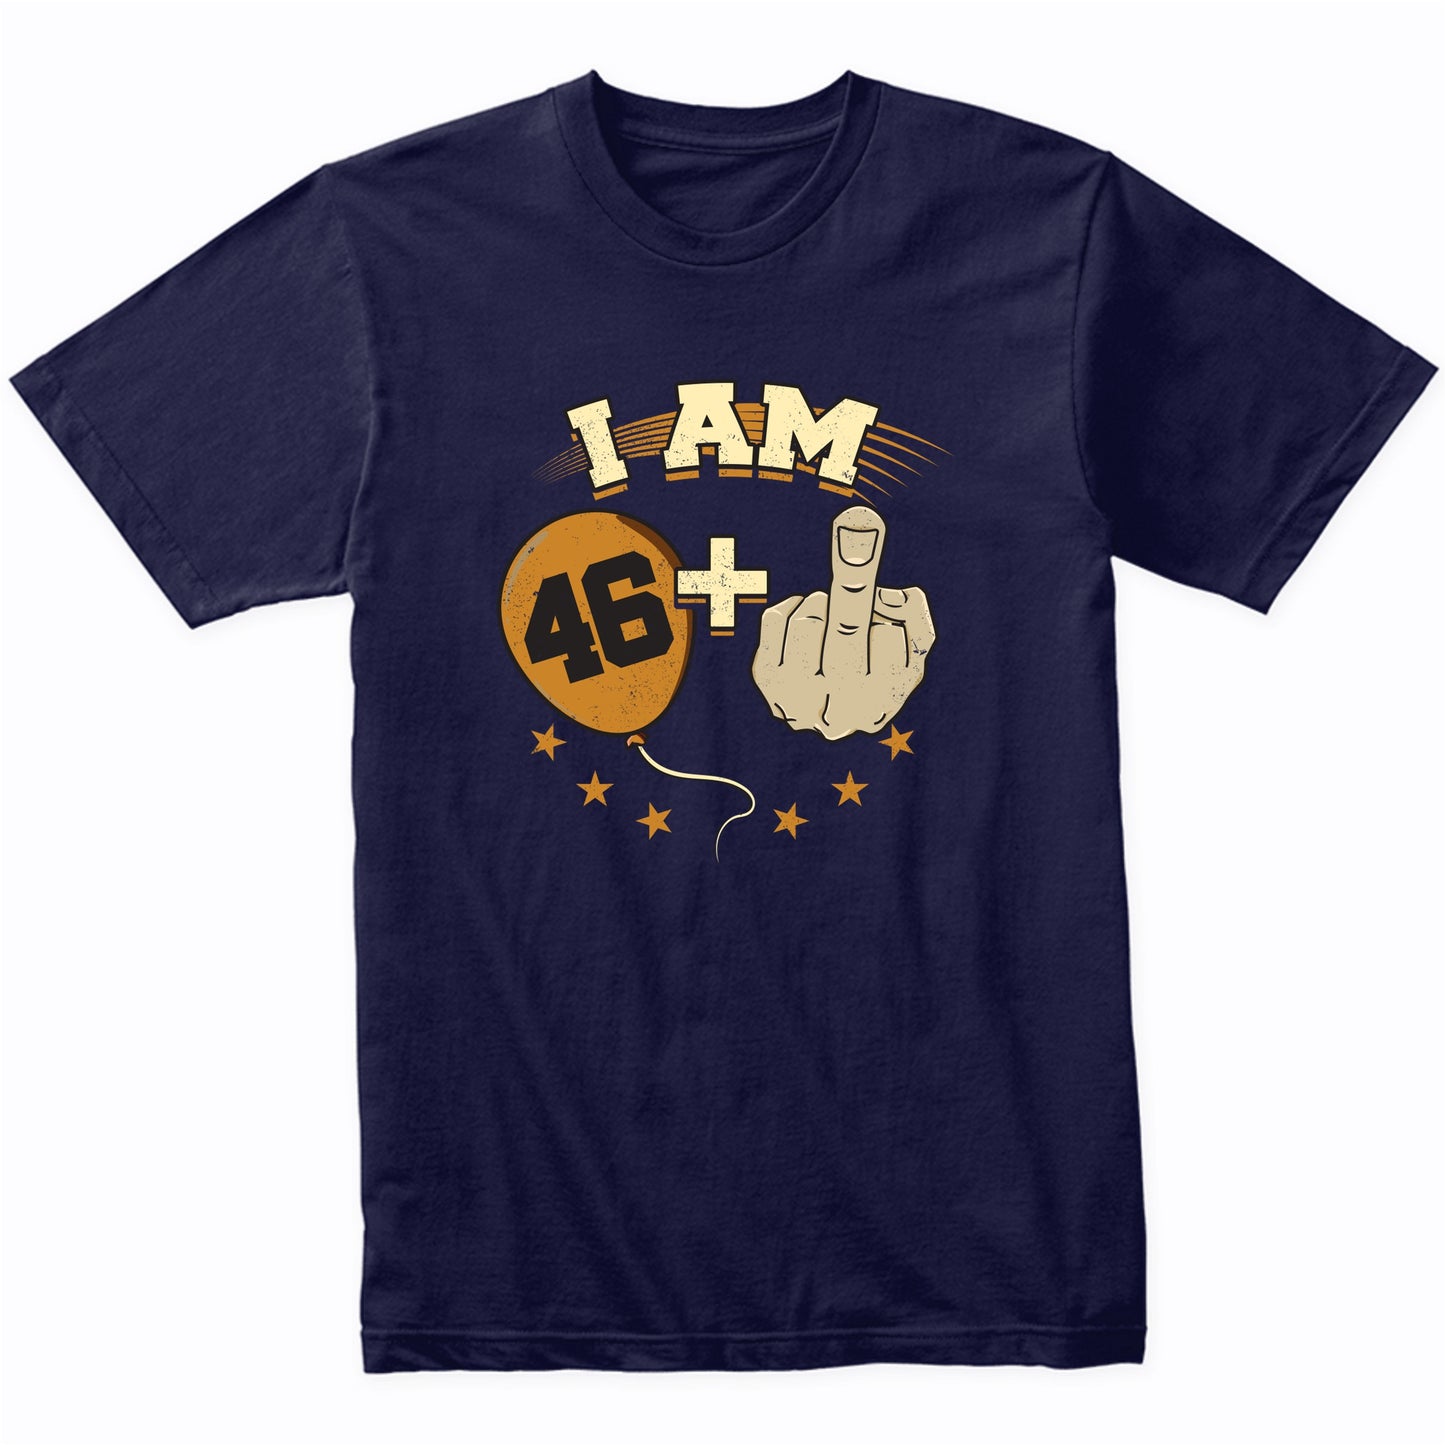 I Am 46 Plus Middle Finger Funny 47th Birthday Party Shirt